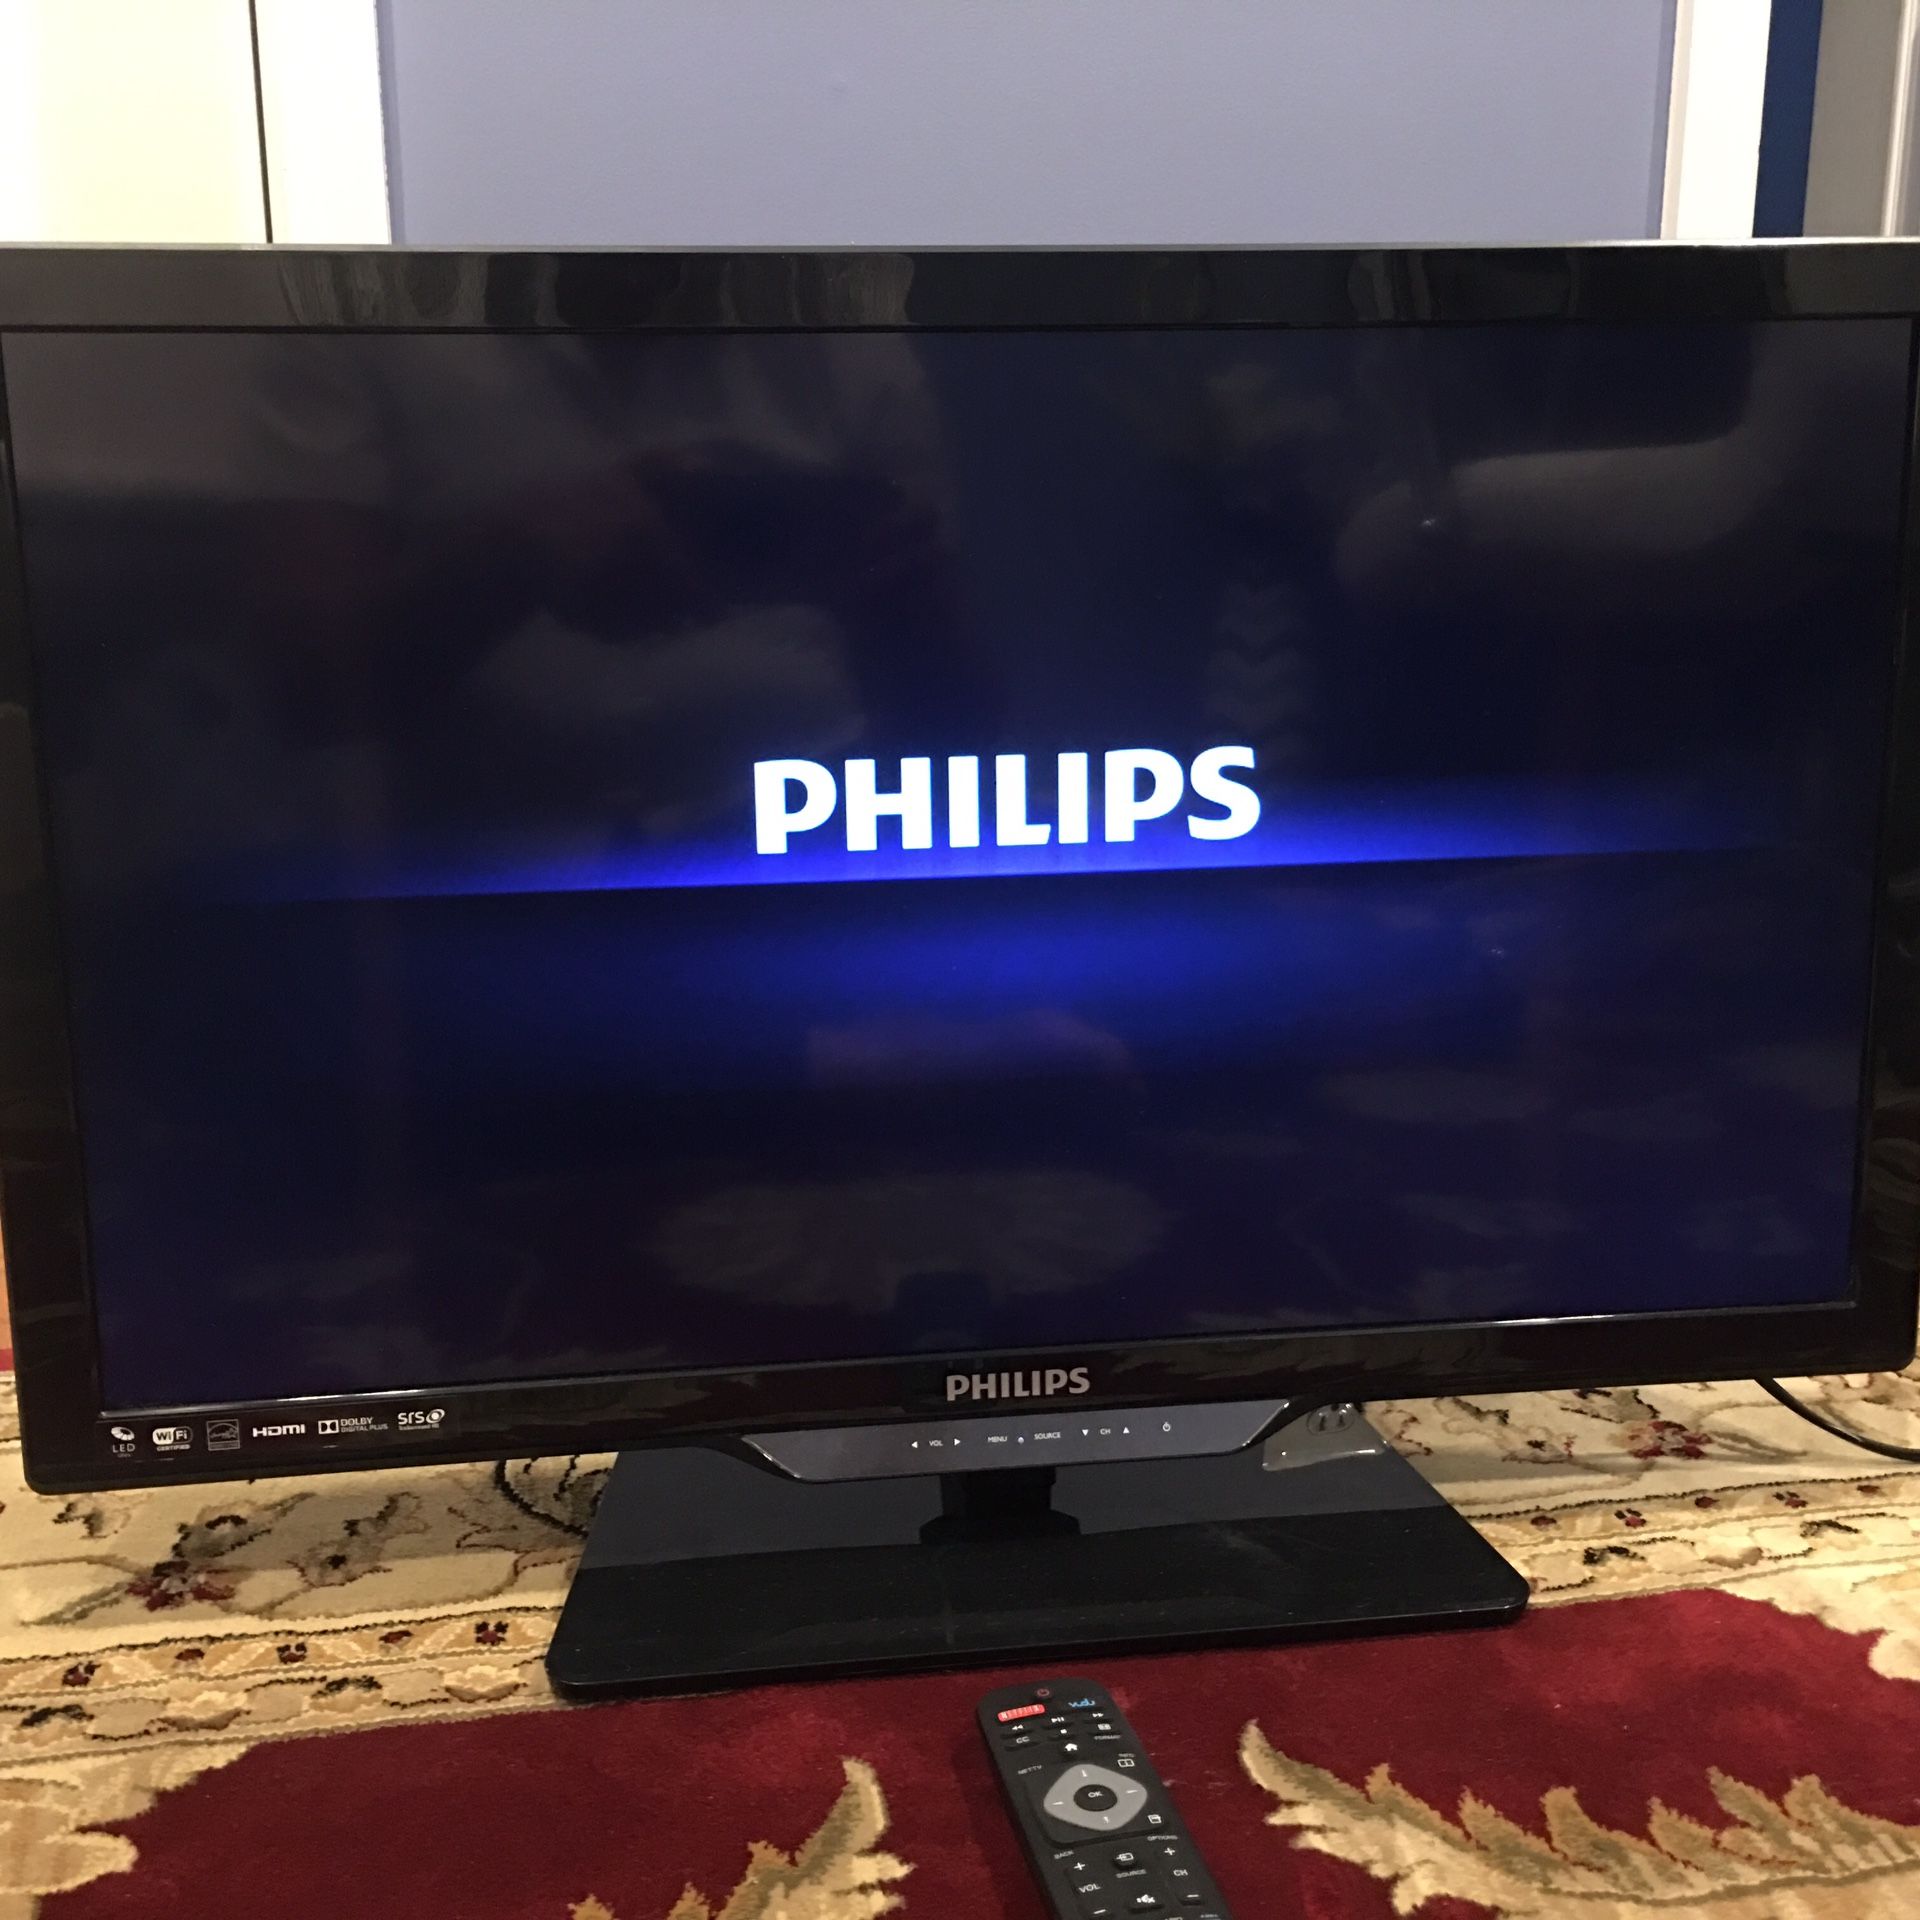 Philips 29” Smart LED TV/monitor with NETTV!